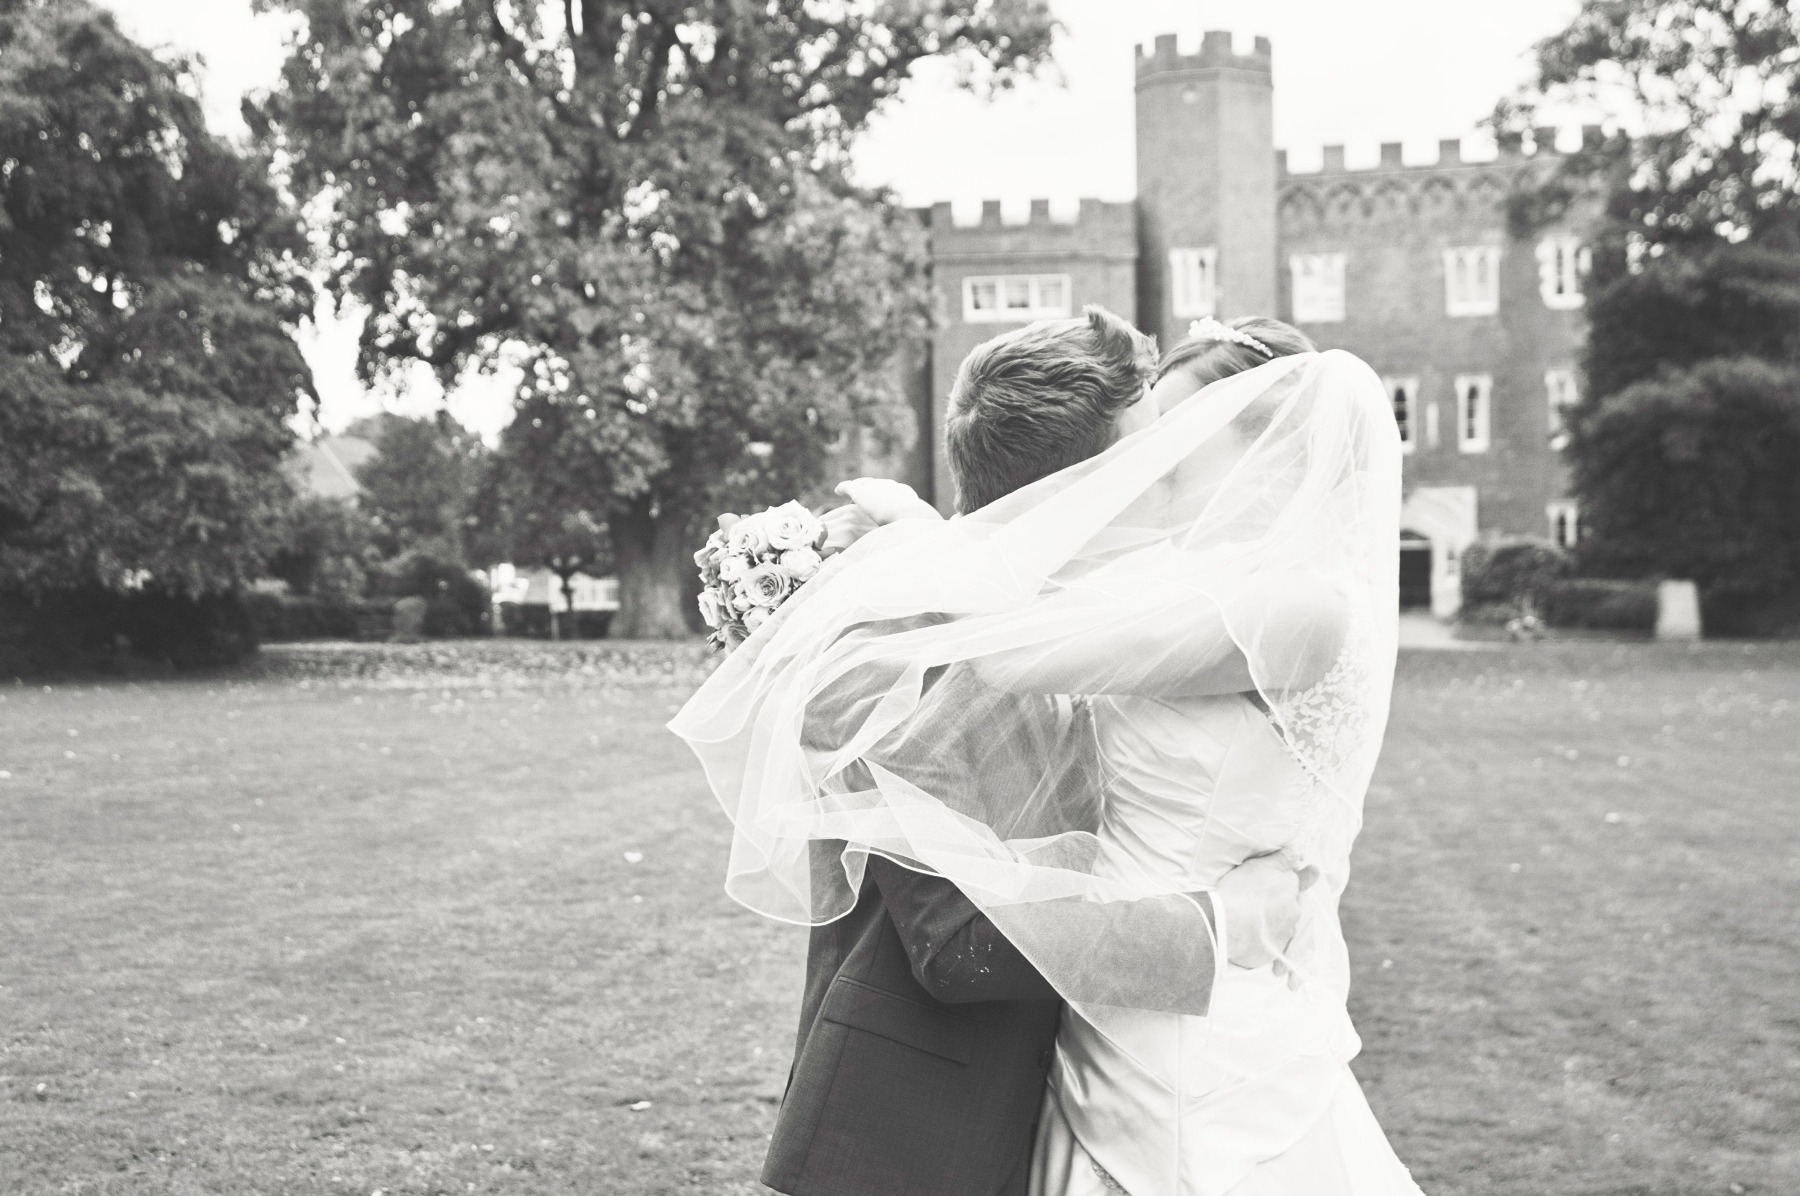 A groom kissing his bride with Hertford Castle in the background, her vail caught in wind